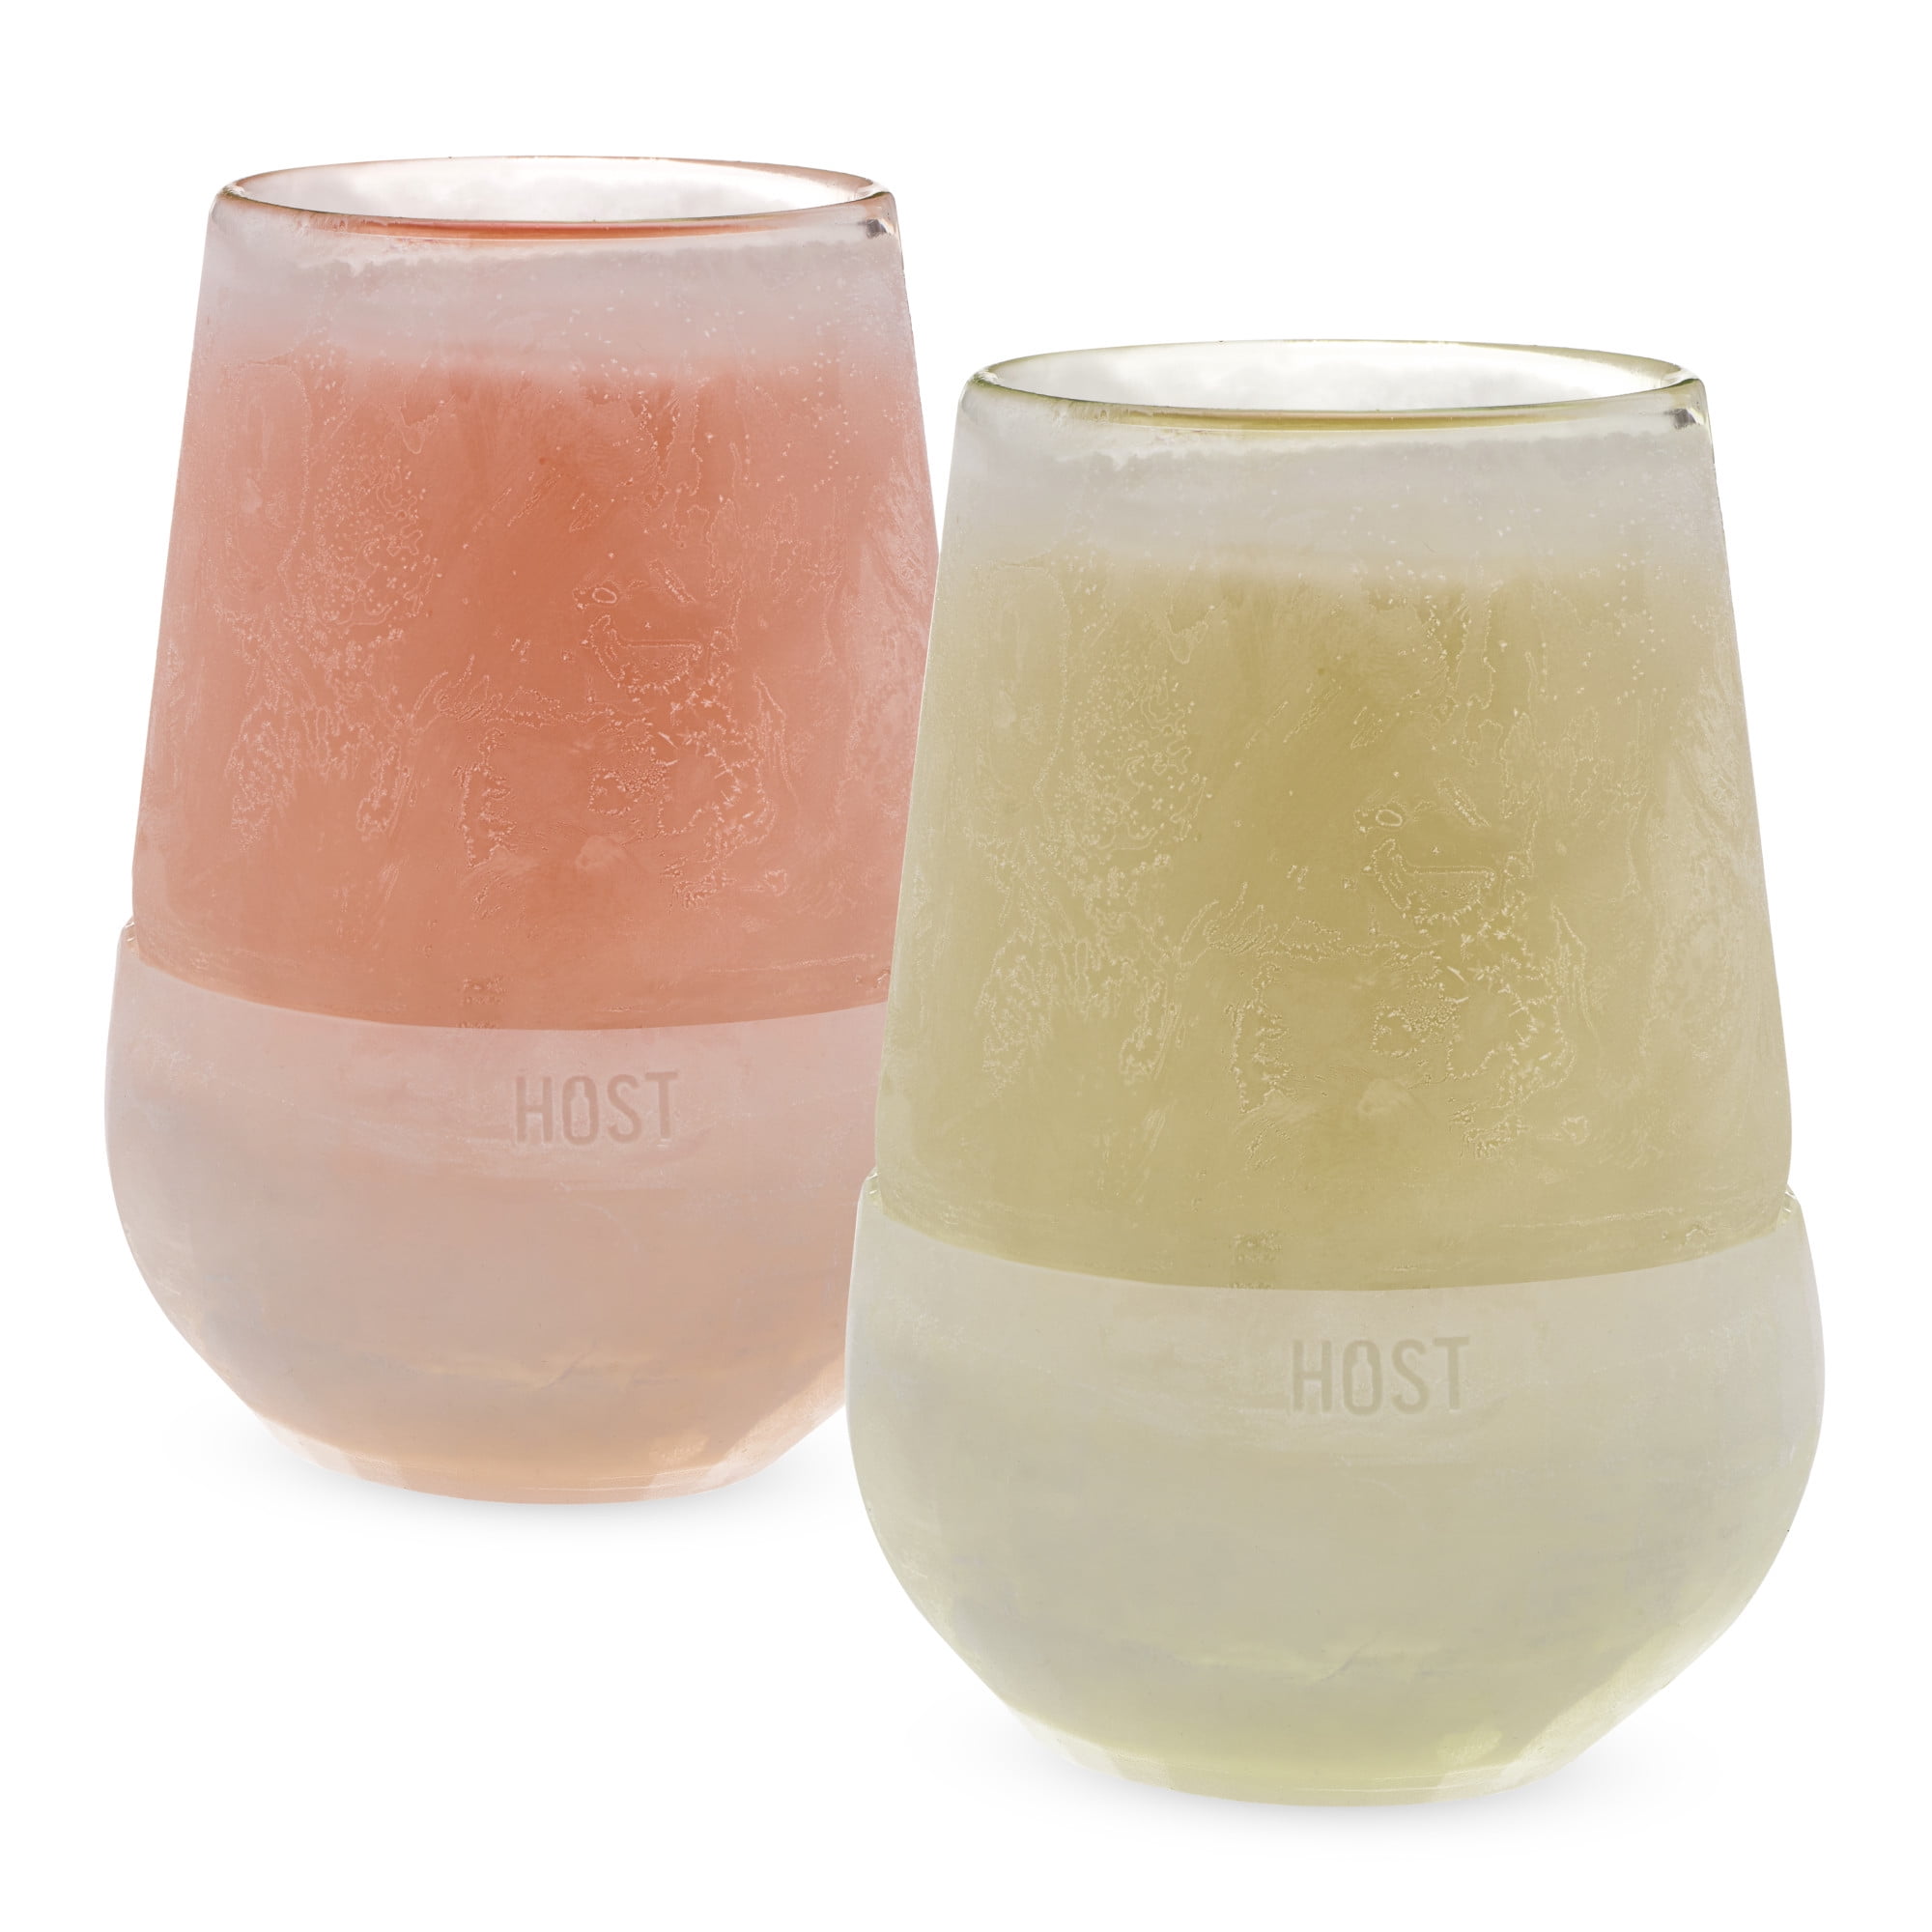 Host Freeze Cooling Glasses, Freezer Gel Stemless Wine Glasses for Red &  White Wine, Insulated Glass with Silicone Band, Set of 2, 8.5 oz 